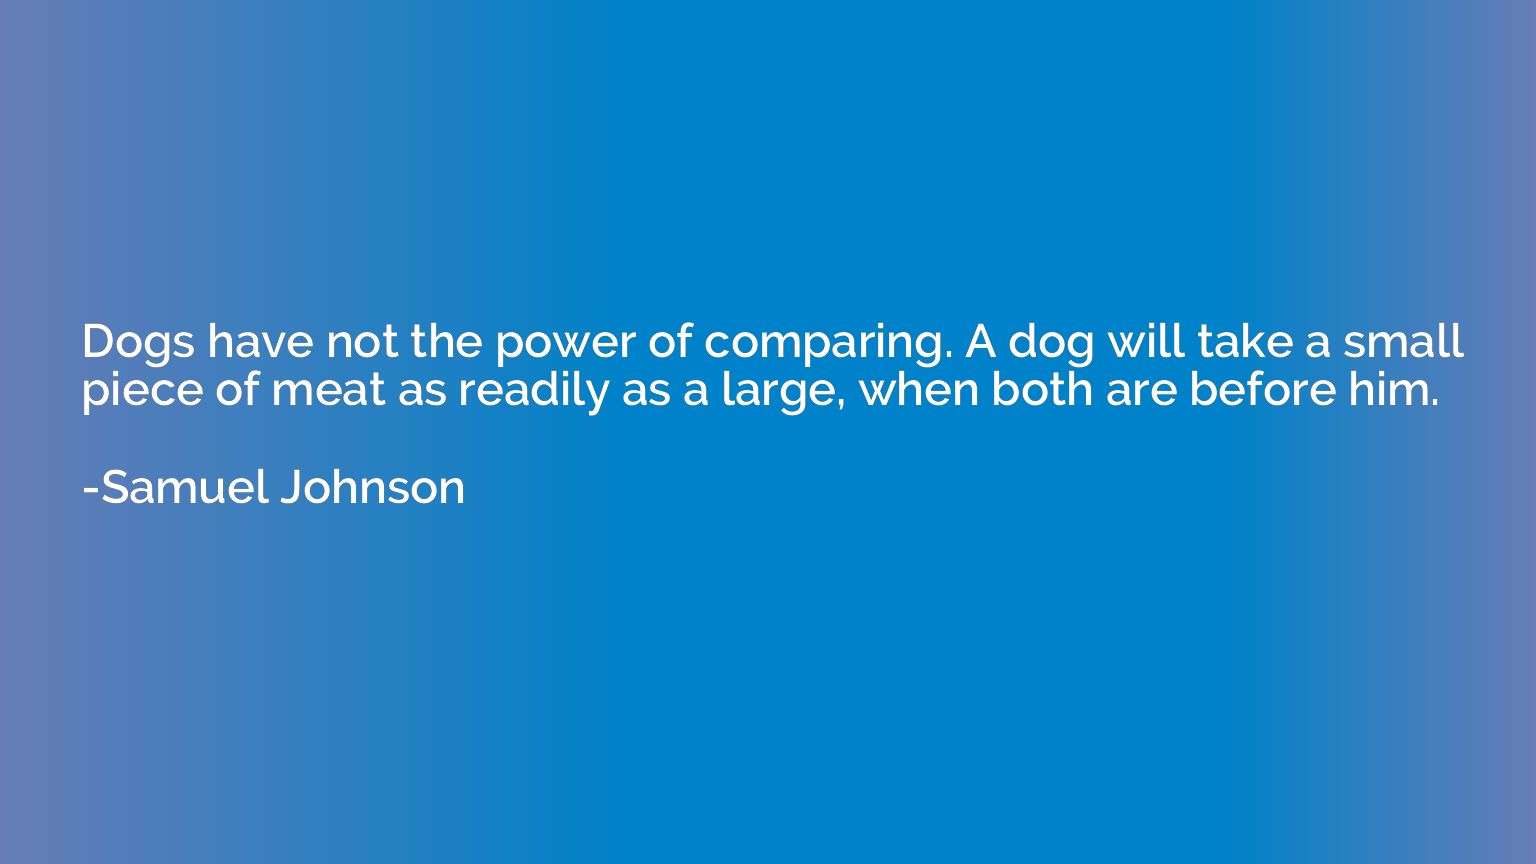 Dogs have not the power of comparing. A dog will take a smal